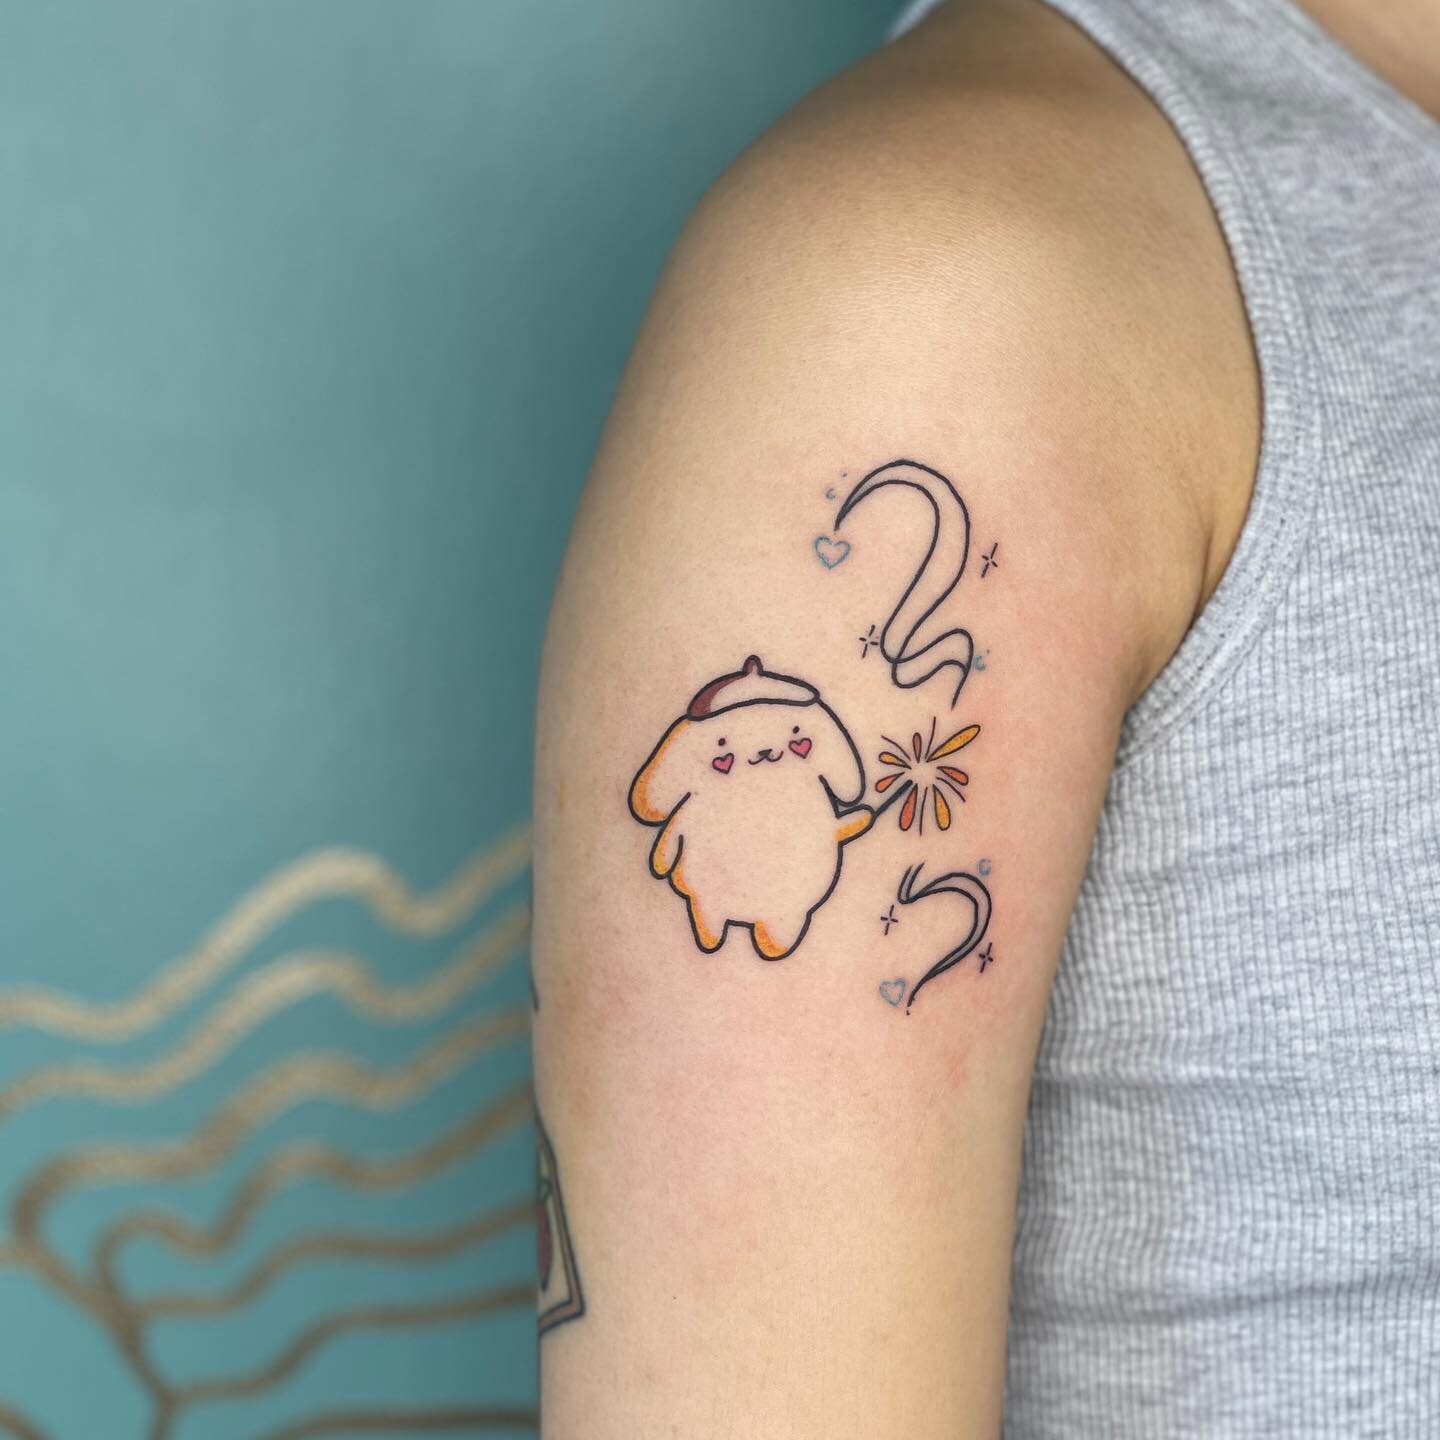 Pom Pom Purin (Tattoo Retouch)
。
Thank you for the trust!
。
Calgary 🇨🇦 Booking Open
。
Pick yours or dm to customize your own tattoo💫
。
Creation has NOTHING to do with real life event or designs.
。
DM for more details about this tattoo.
。
Like and 